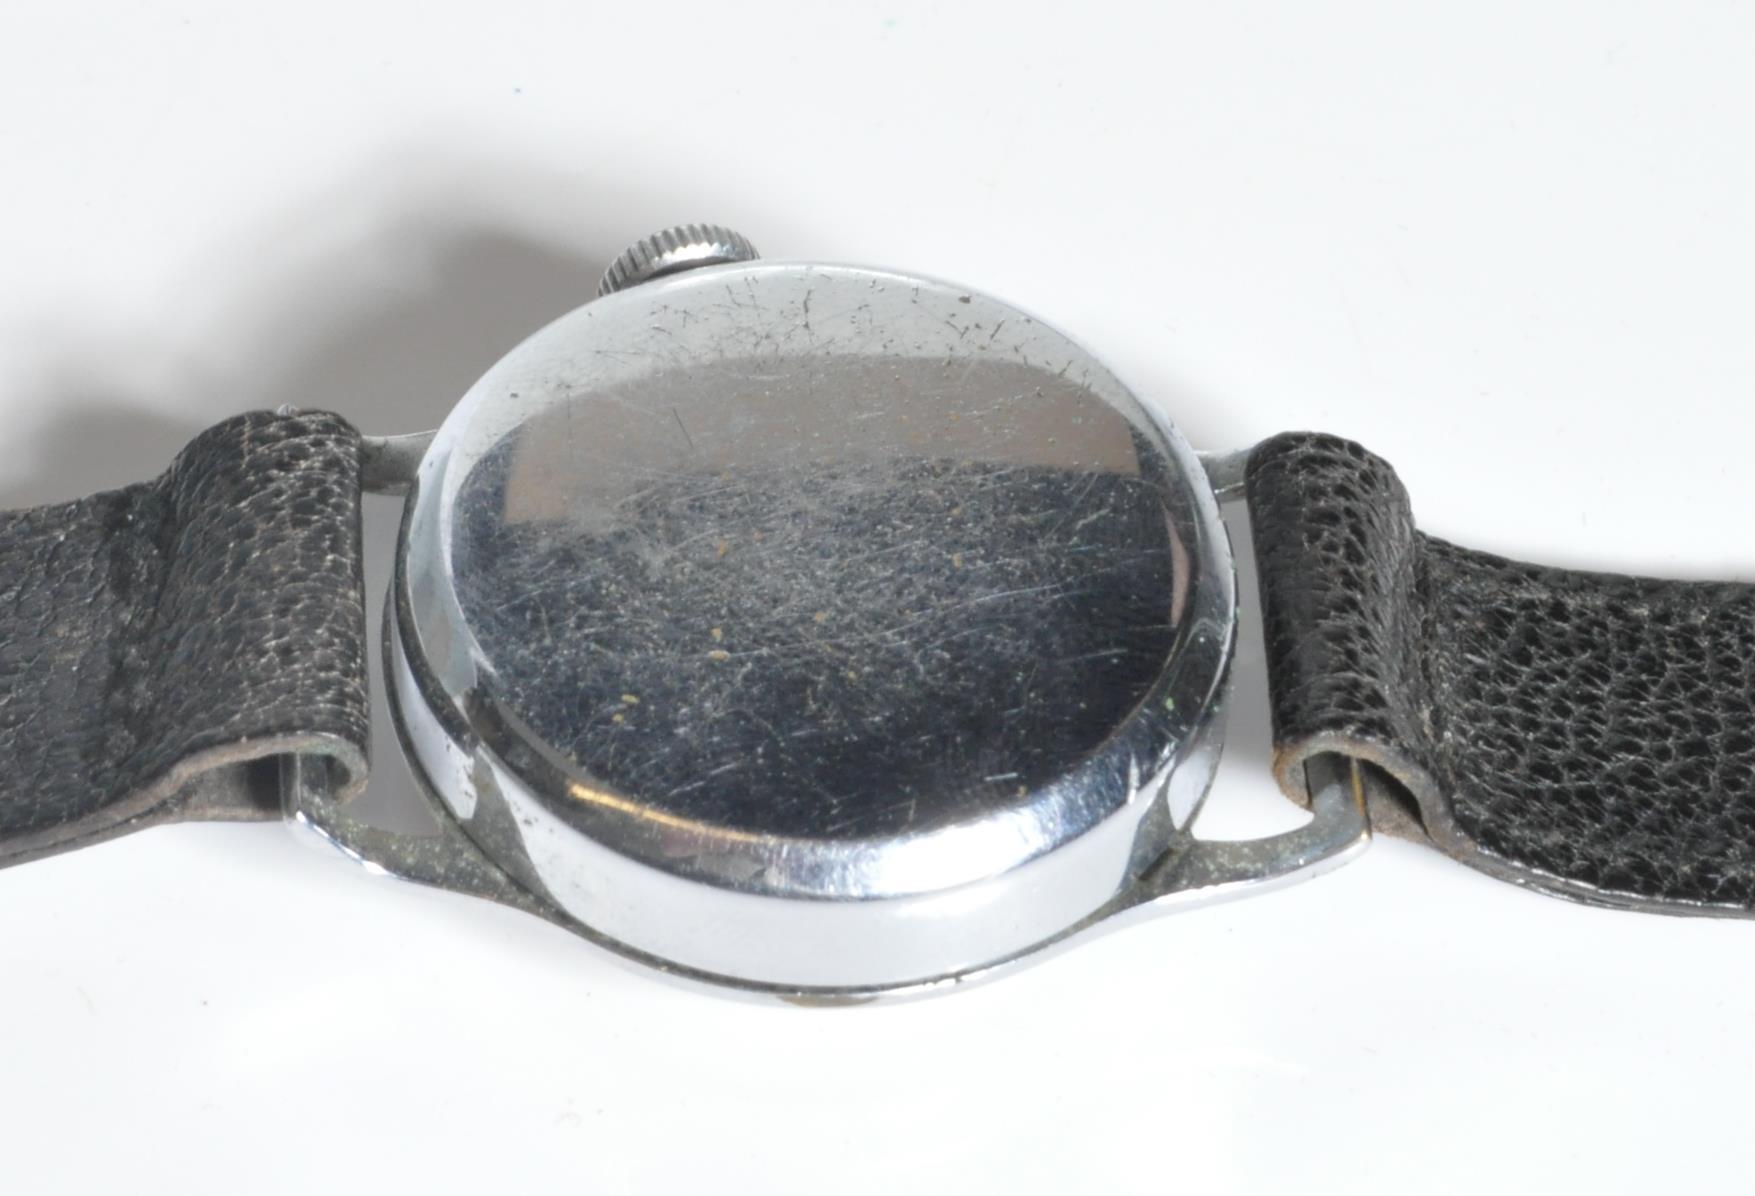 MID 20TH CENTURY SERVICES COLONIAL GENTLEMEN'S WRISTWATCH - Image 4 of 11